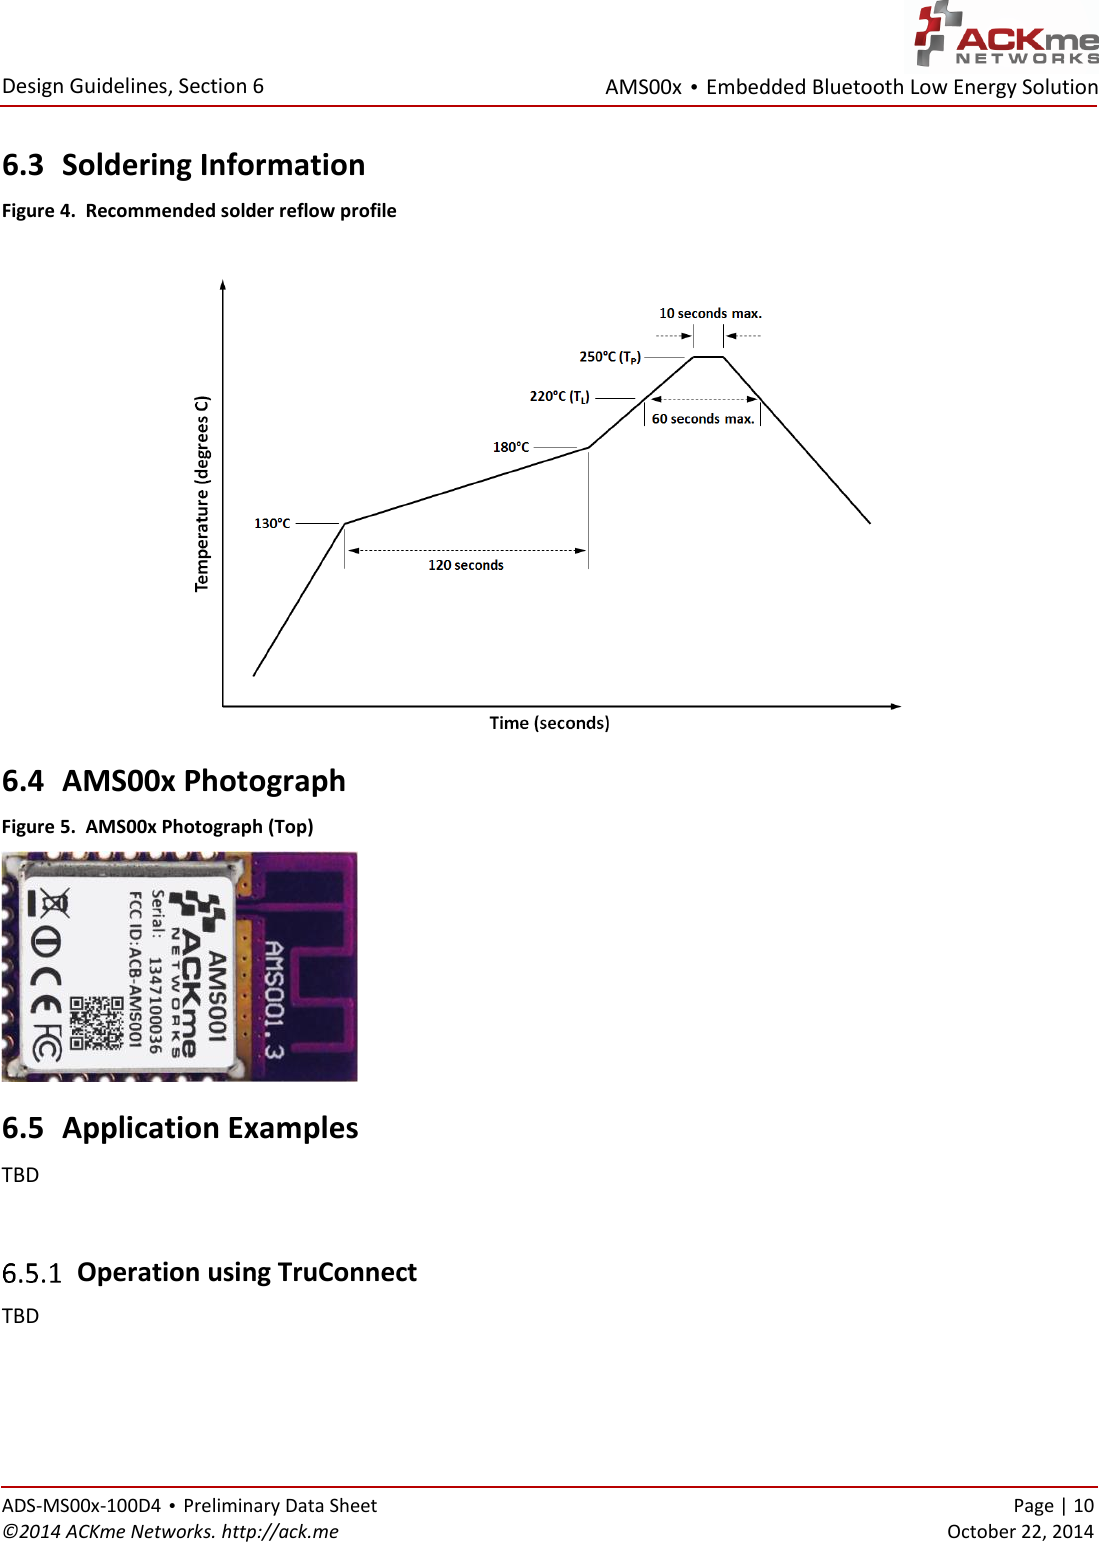 AMS00x • Embedded Bluetooth Low Energy Solution  Design Guidelines, Section 6 ADS-MS00x-100D4 • Preliminary Data Sheet    Page | 10 ©2014 ACKme Networks. http://ack.me    October 22, 2014 6.3 Soldering Information Figure 4.  Recommended solder reflow profile   6.4 AMS00x Photograph Figure 5.  AMS00x Photograph (Top) 6.5 Application Examples TBD   Operation using TruConnect TBD  